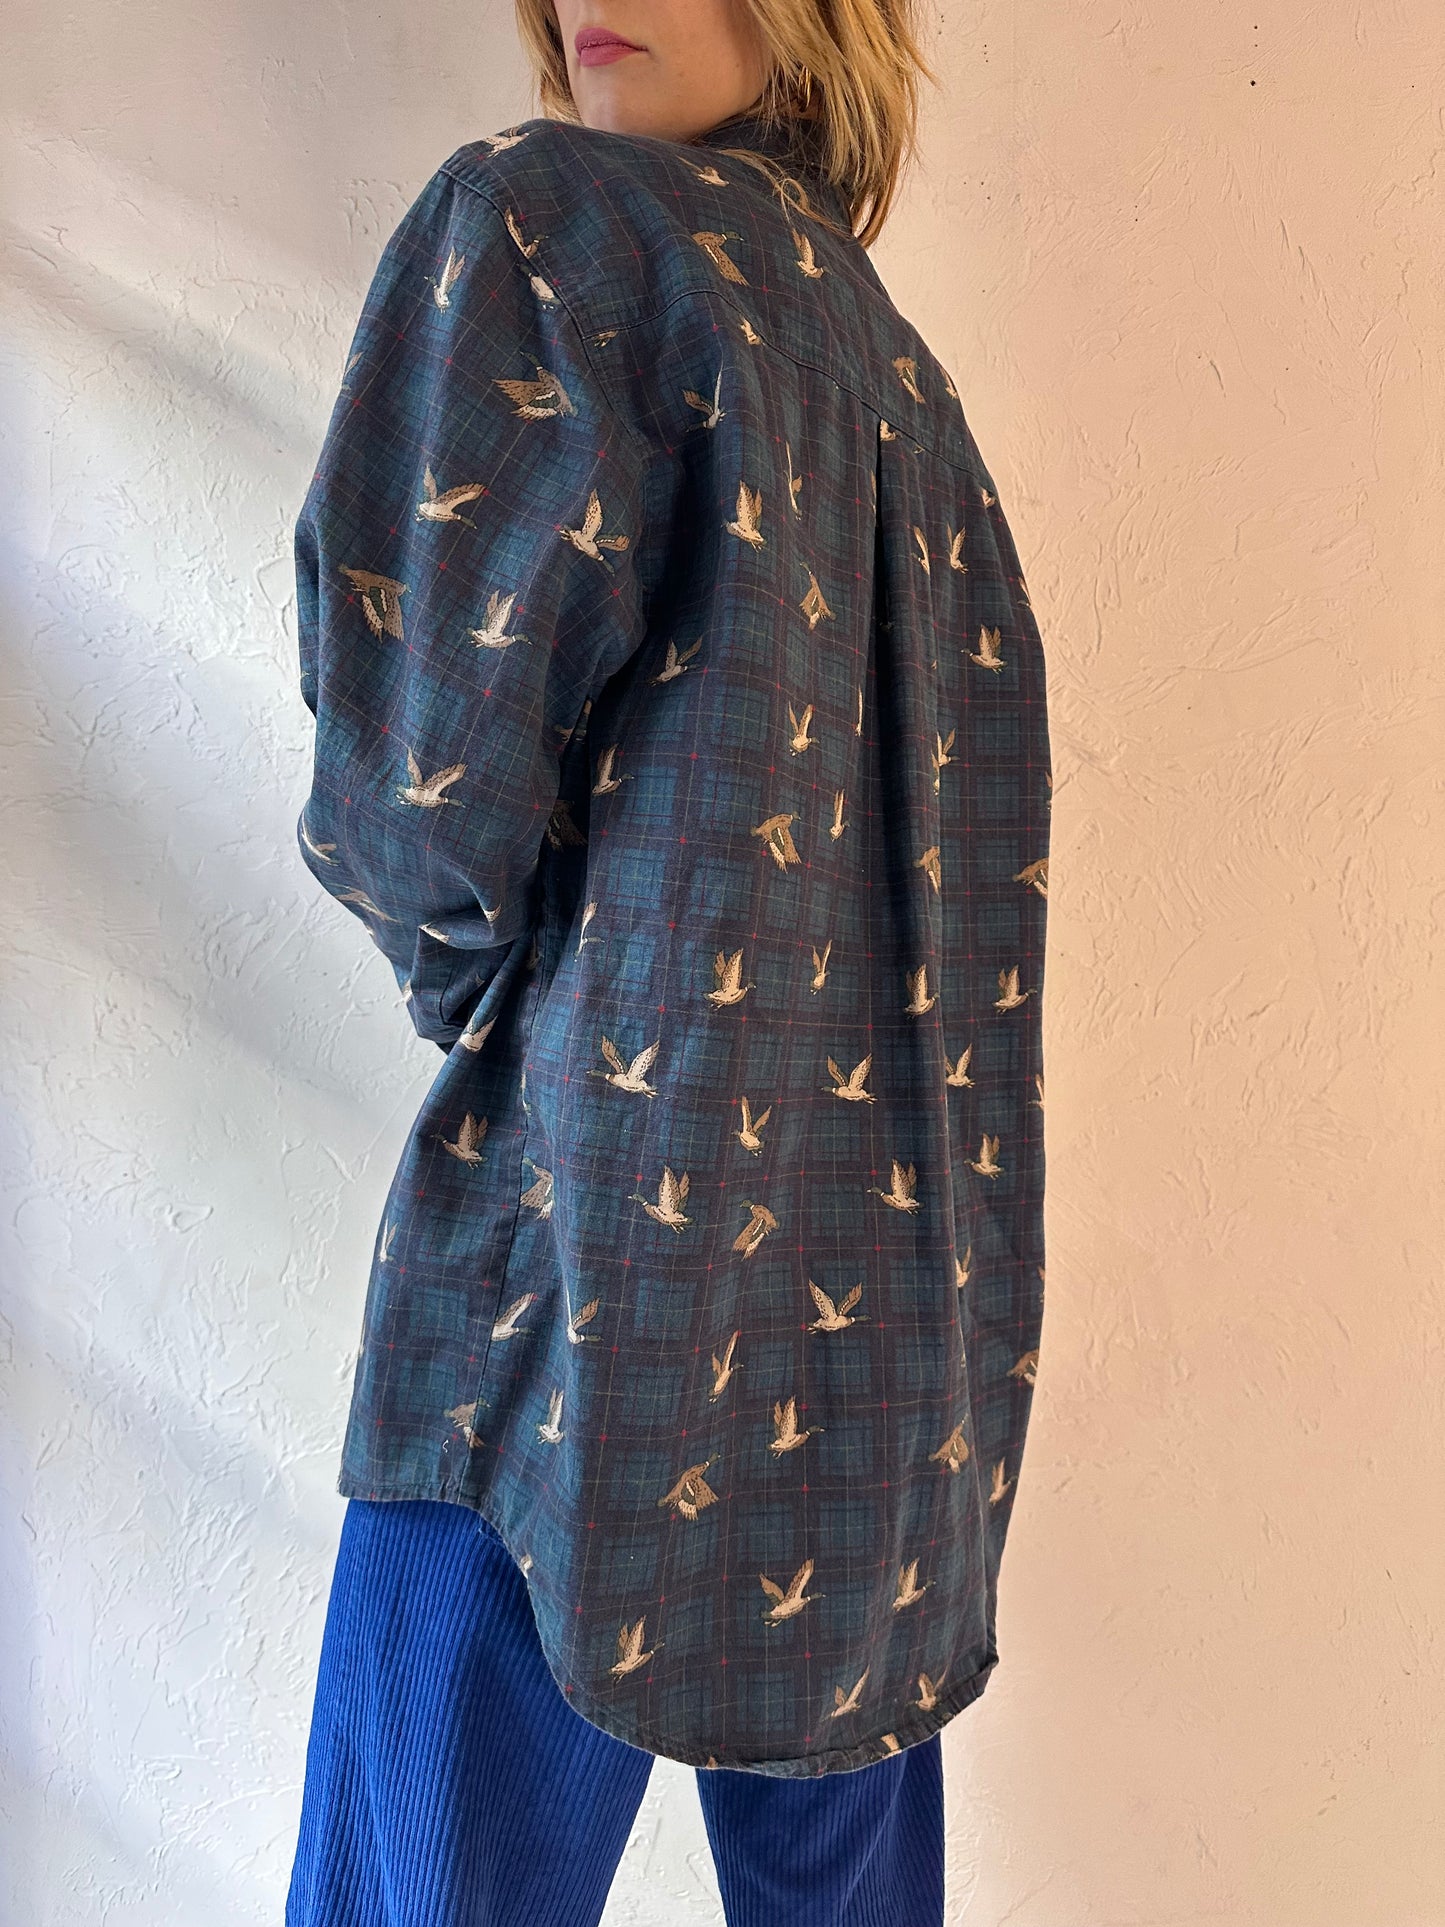 Y2k 'Wrangler' Button Up Duck Shirt / Large